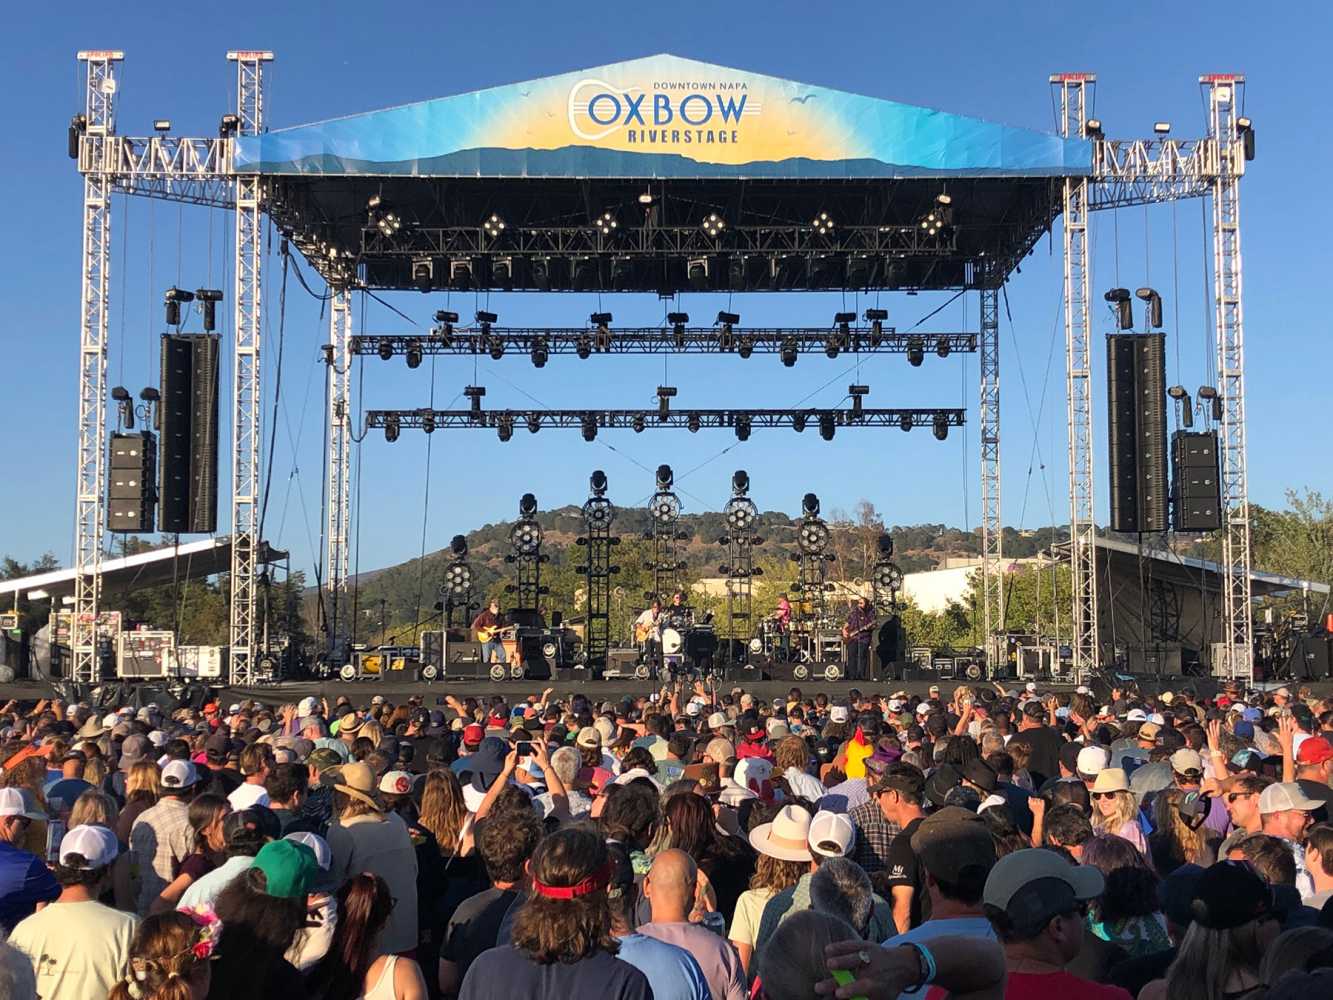 Oxbow RiverStage utilised nine Anya’s flown inside and three Otto subs on each side of the stage